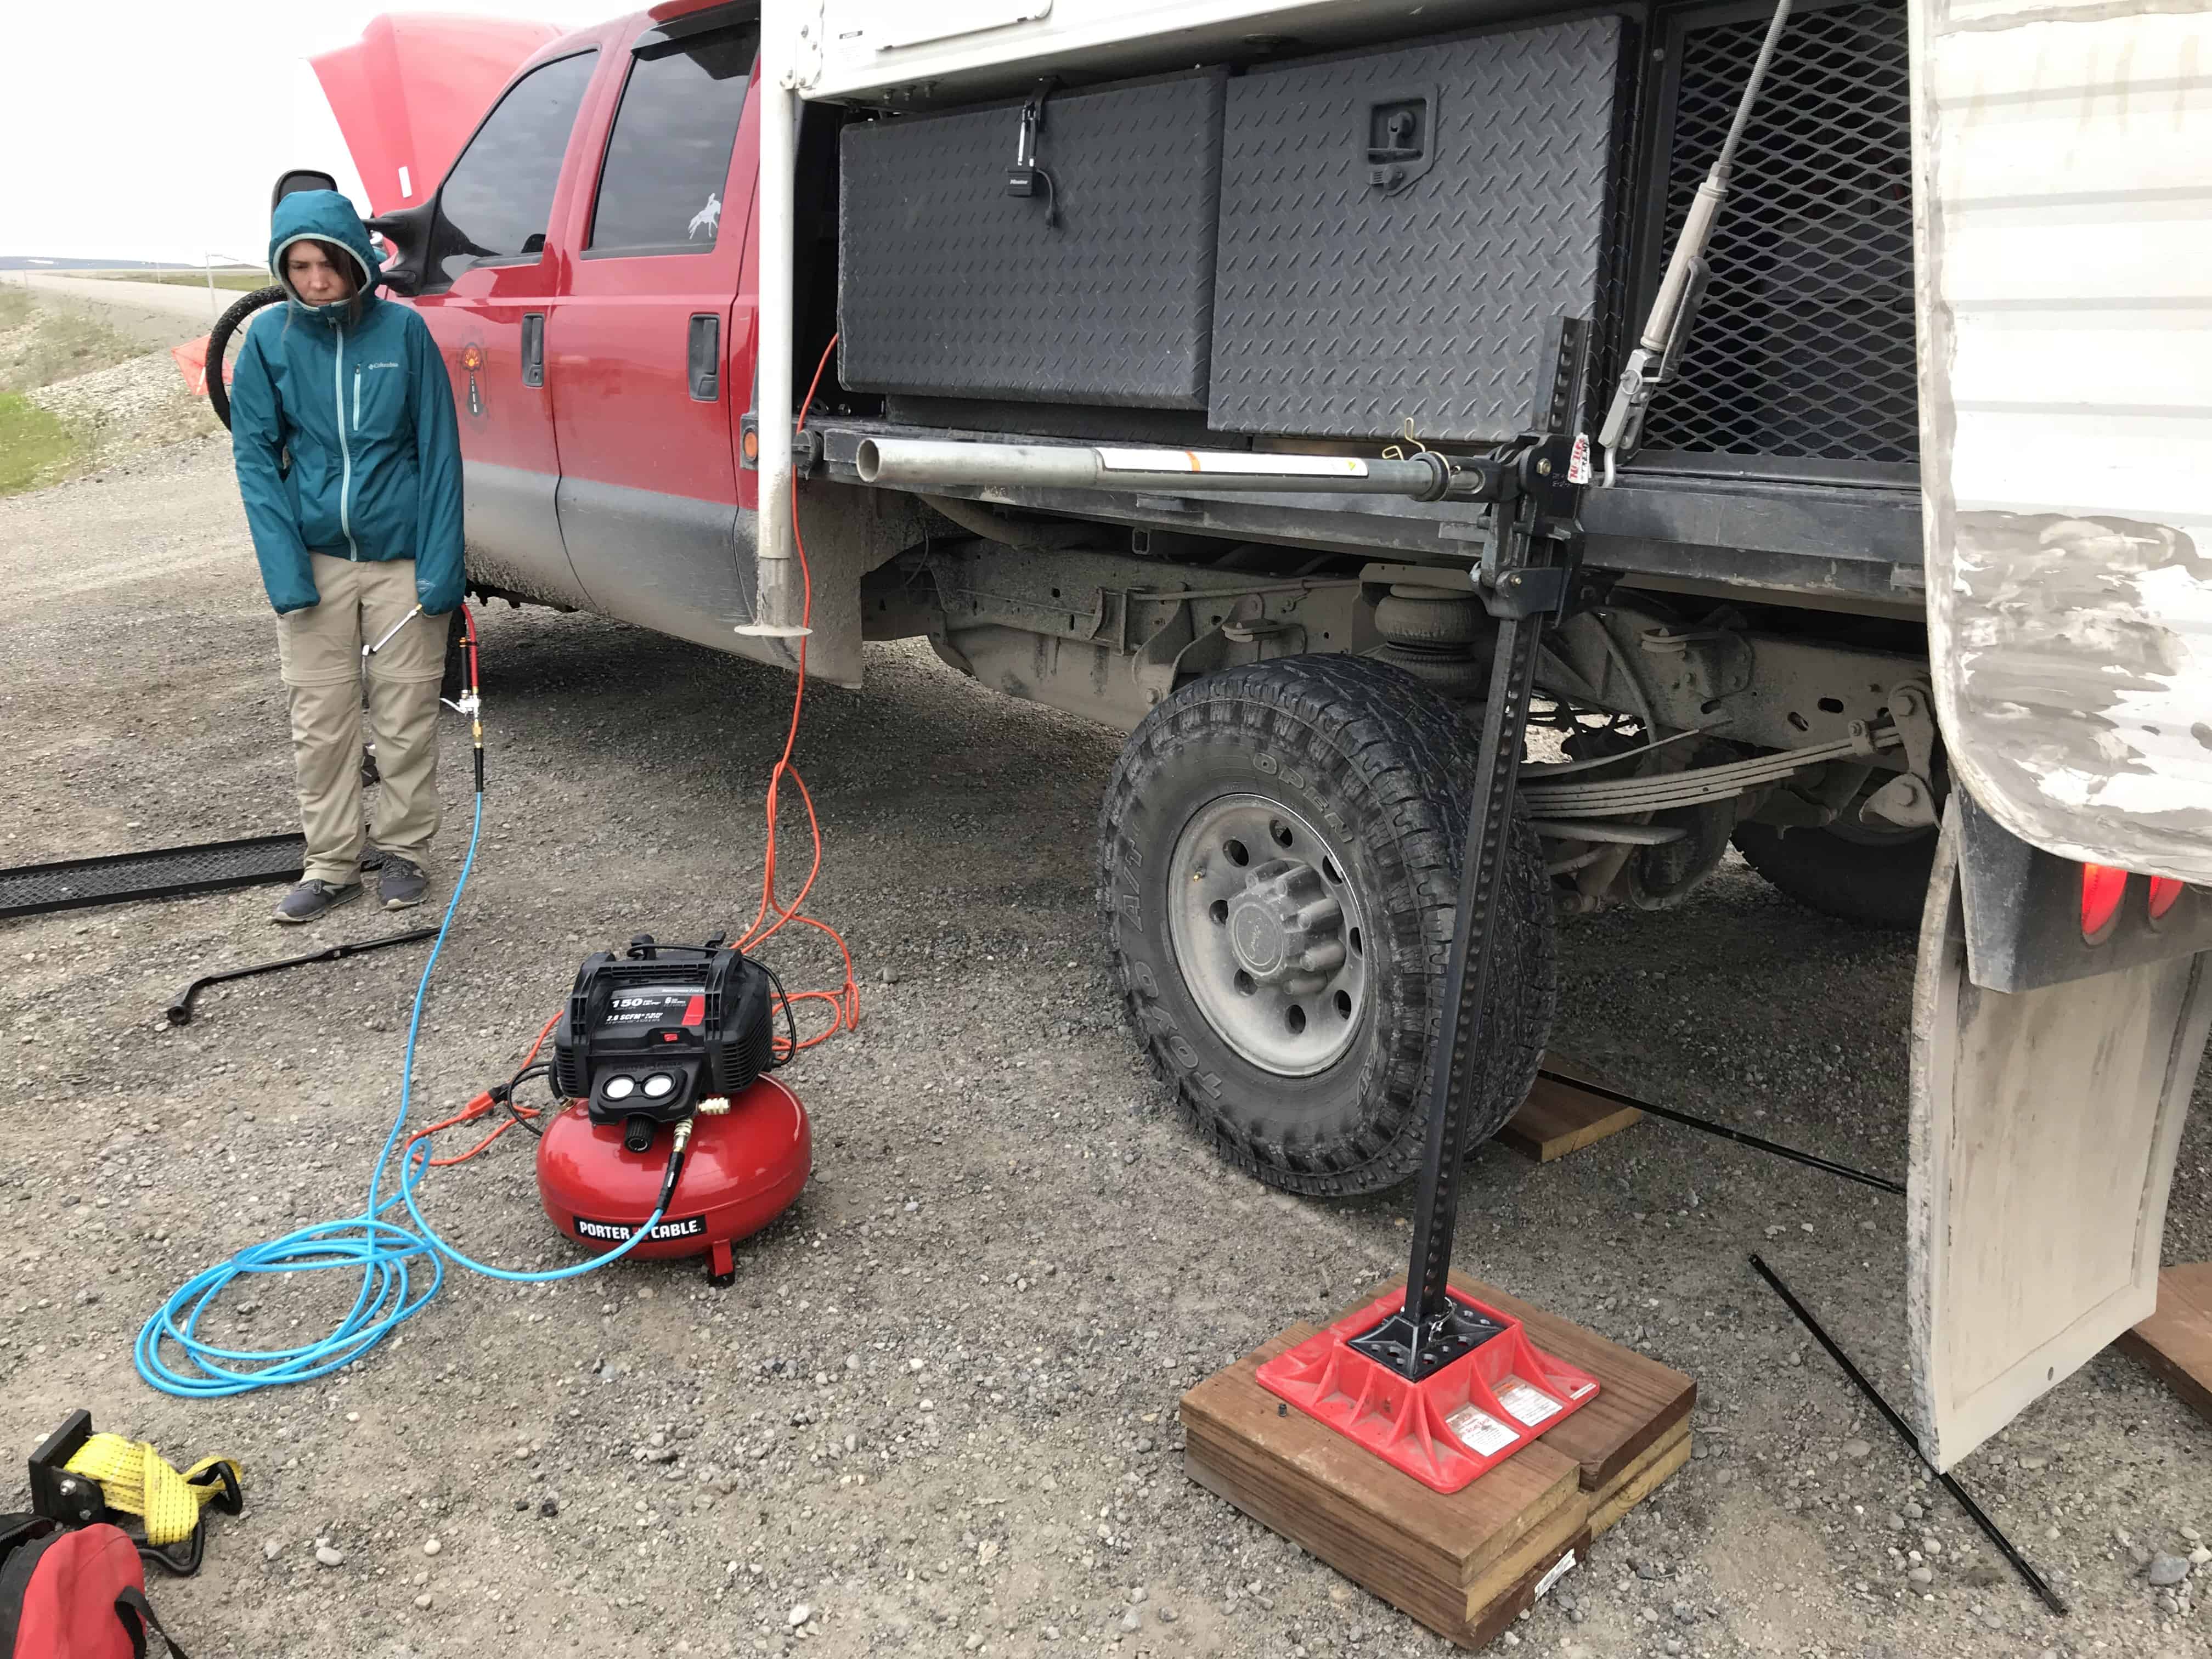 Flat tire on a truck on the Dalton Highway